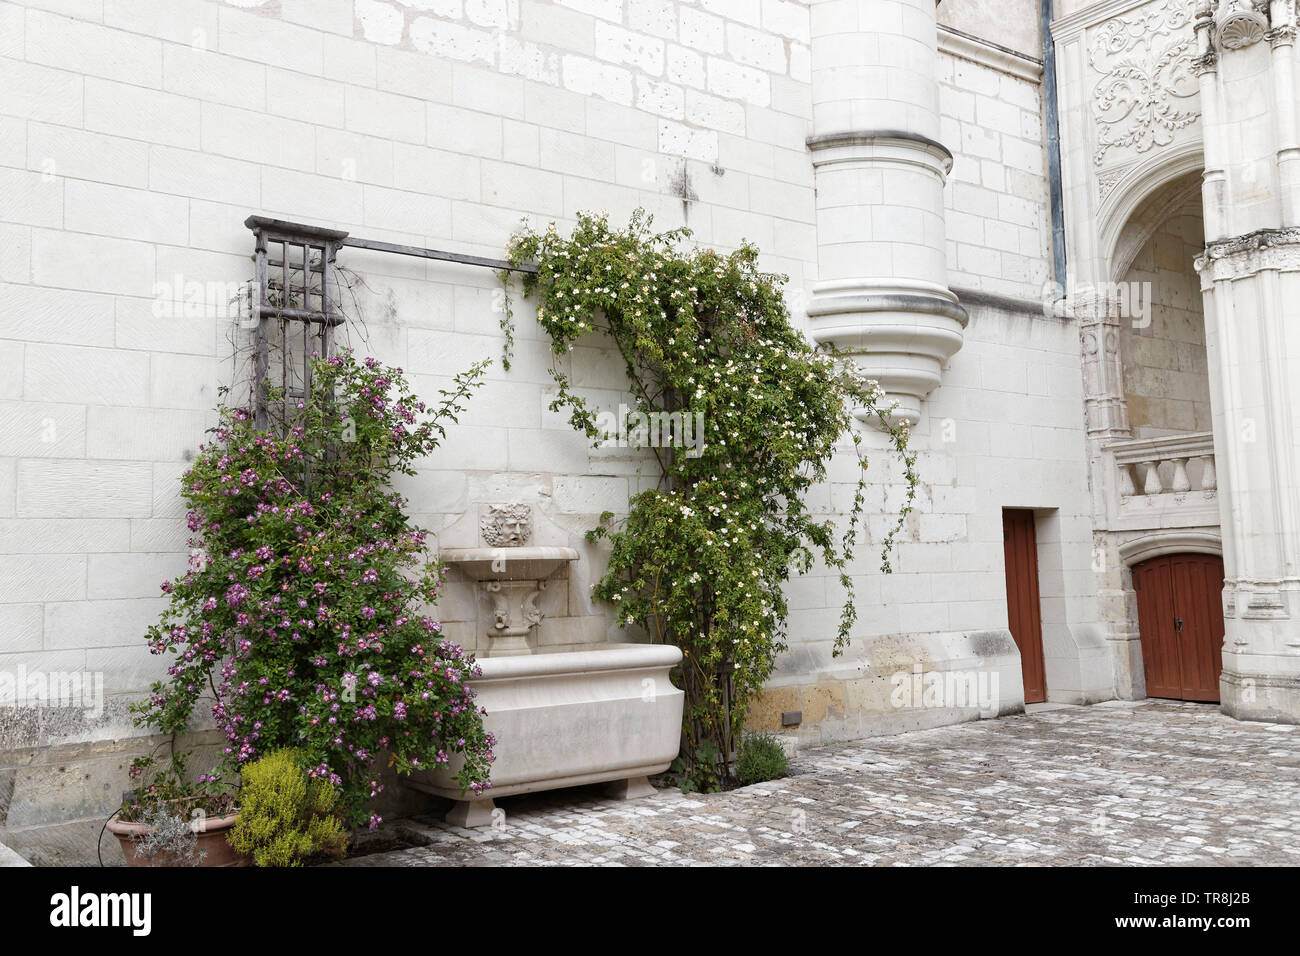 Tours, France.24th May, 2019.The Gouin Hotel for the 500 years of Renaissance(s) with the Capazza Gallery.Credit:Veronique Phitoussi/Alamy Stock Photo Stock Photo